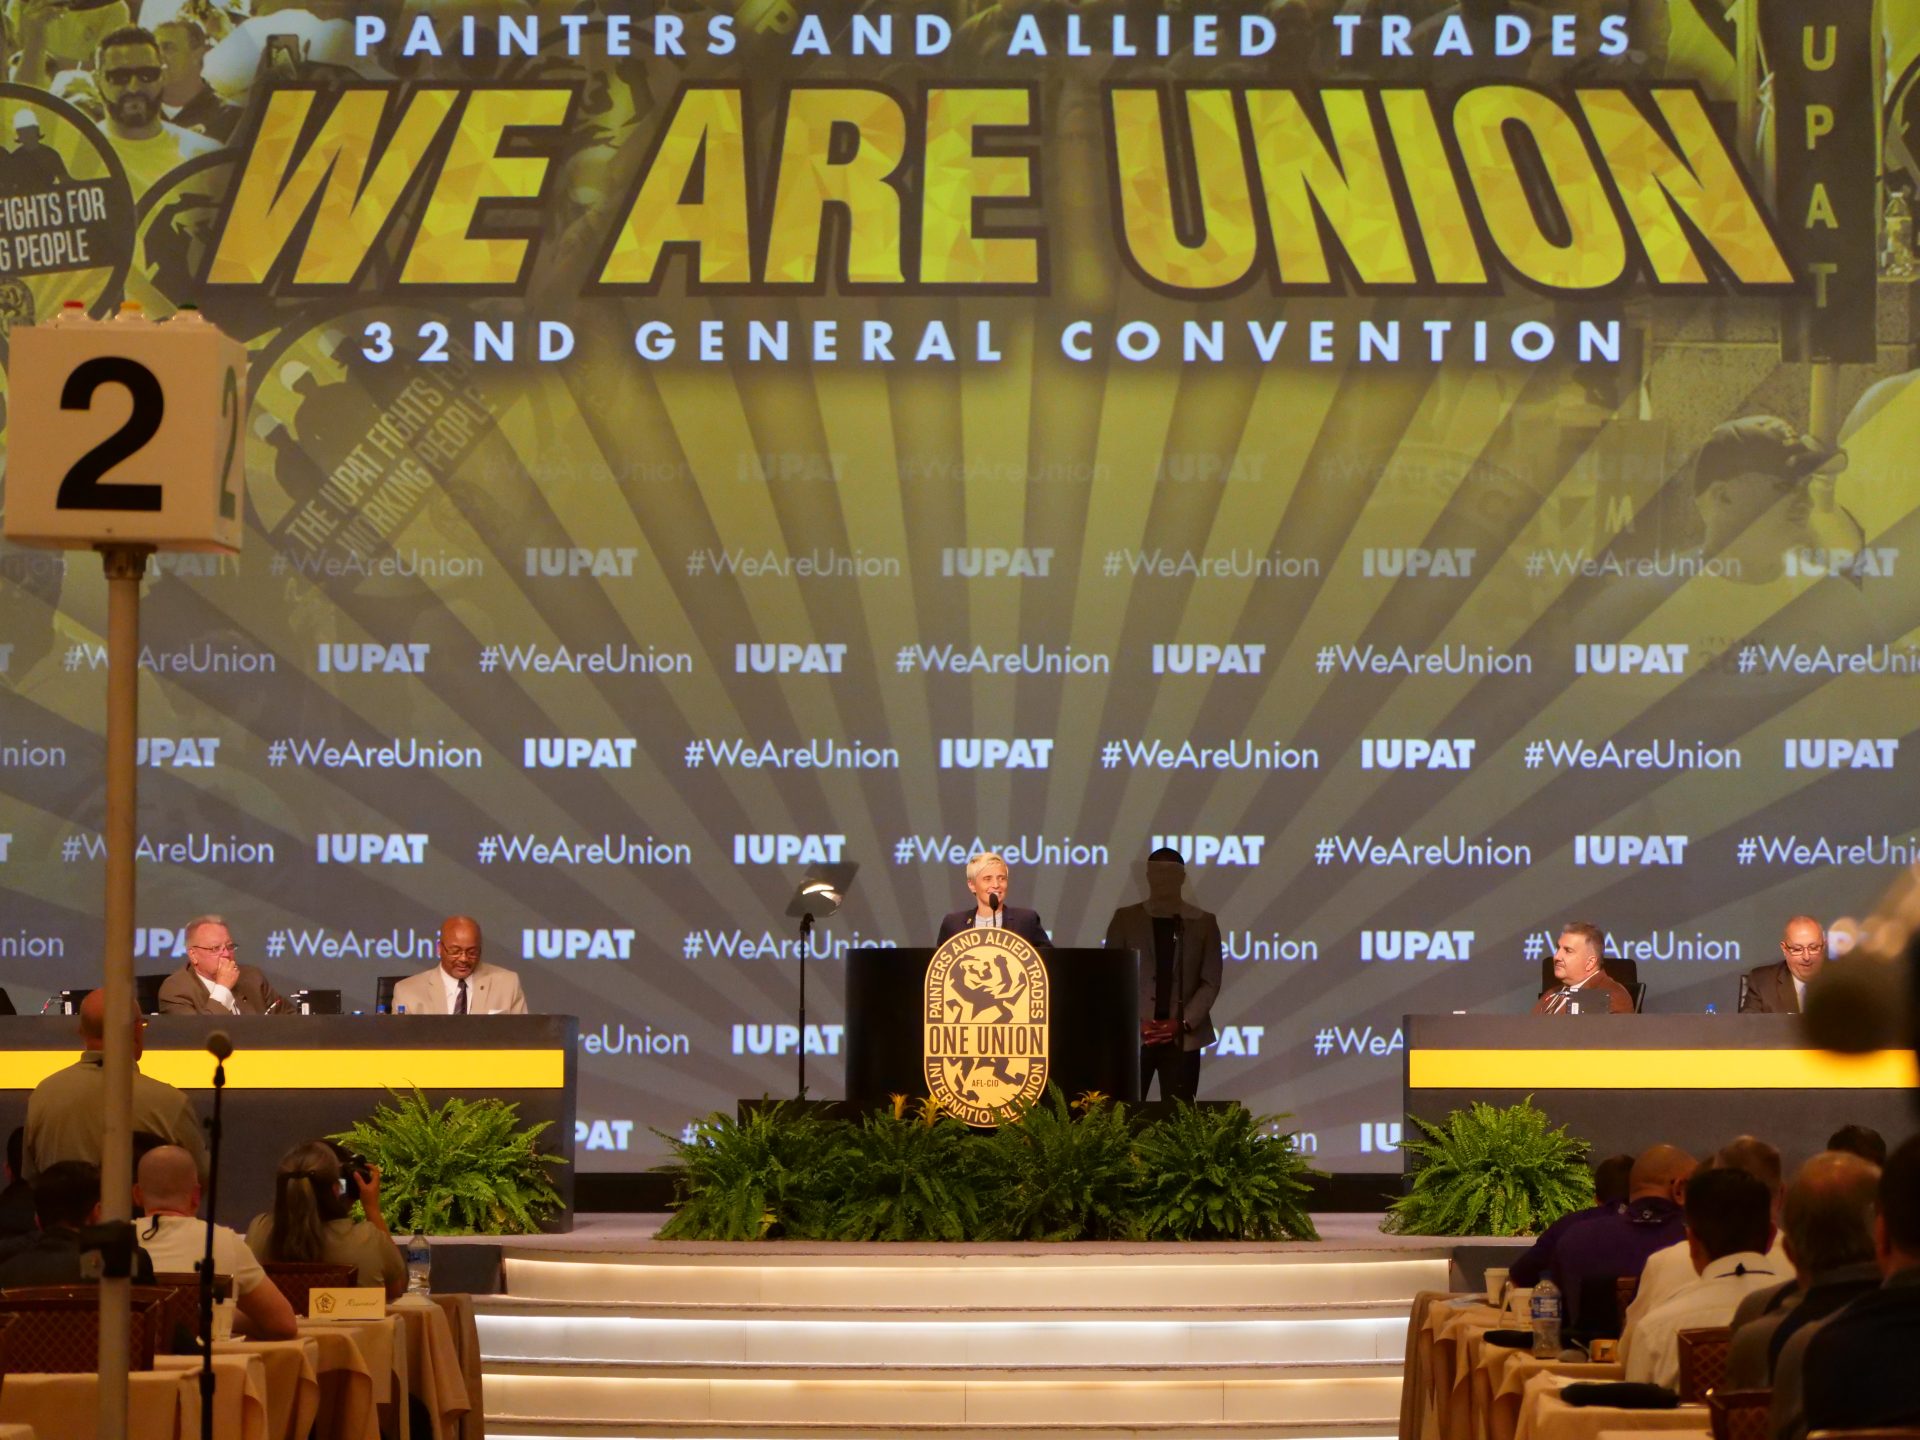 Image from the Gallery: 32nd General Convention – Las Vegas, NV